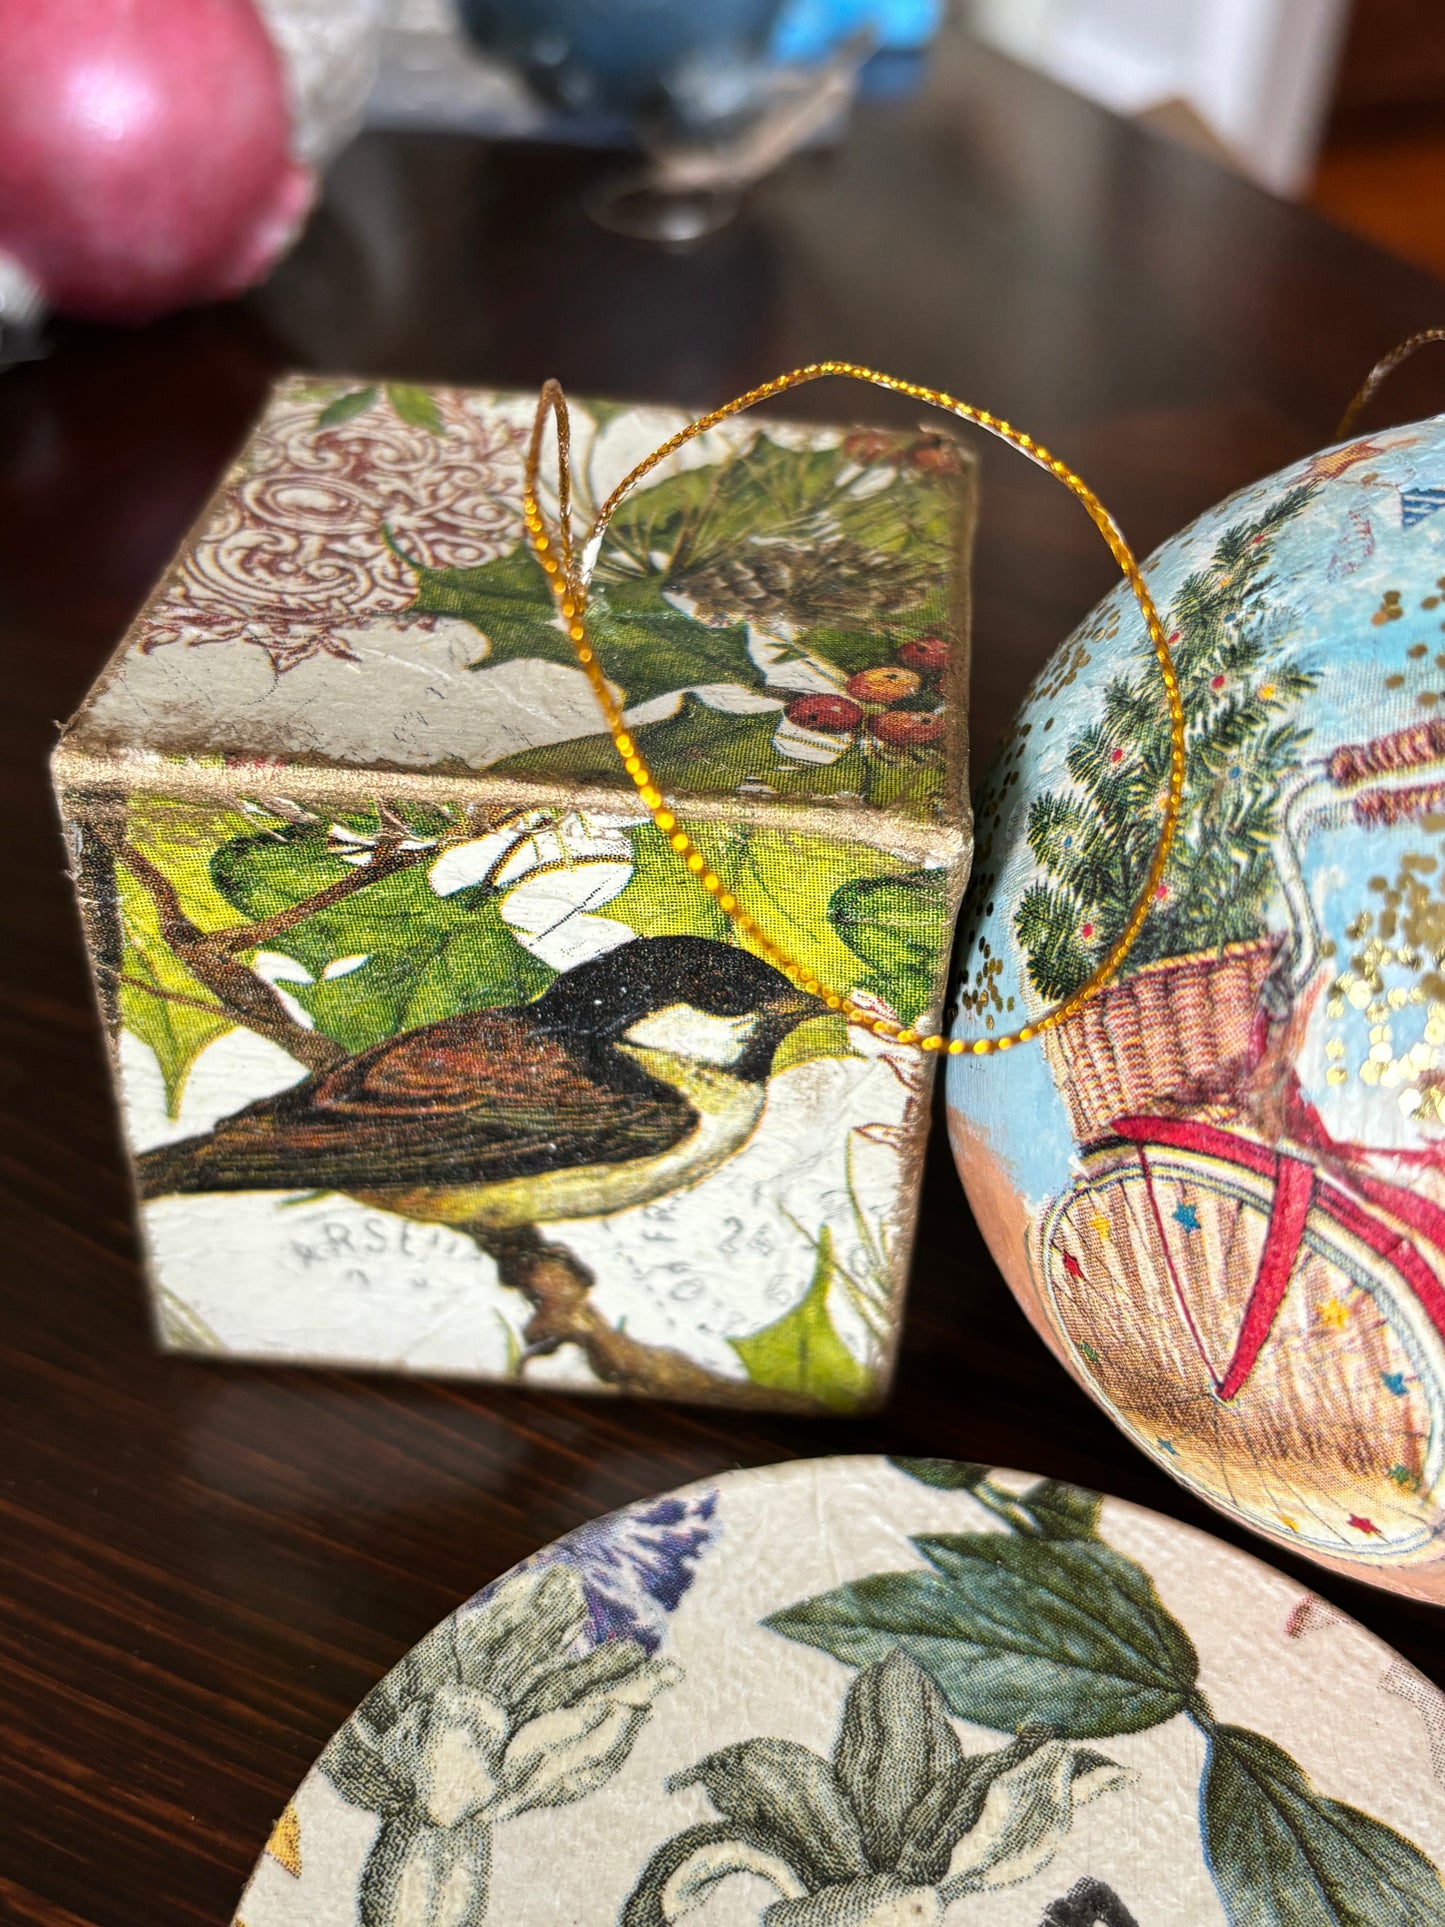 Set of 7 Rustic Decoupage Handmade Christmas Ornaments, Vintage Cabin Style